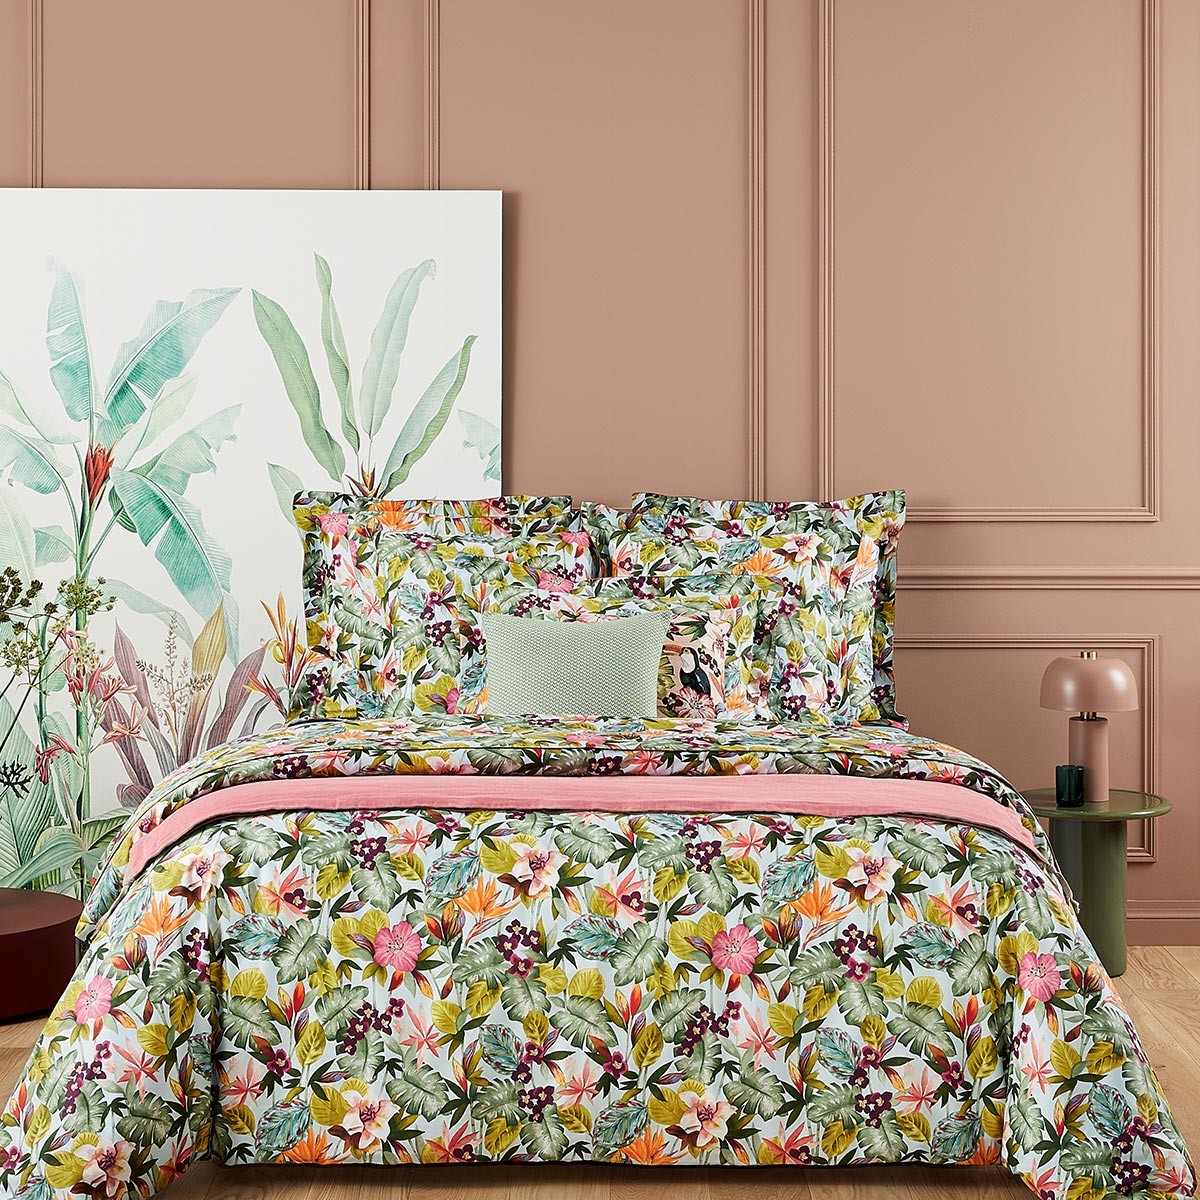 Utopia Bed Linen Collection